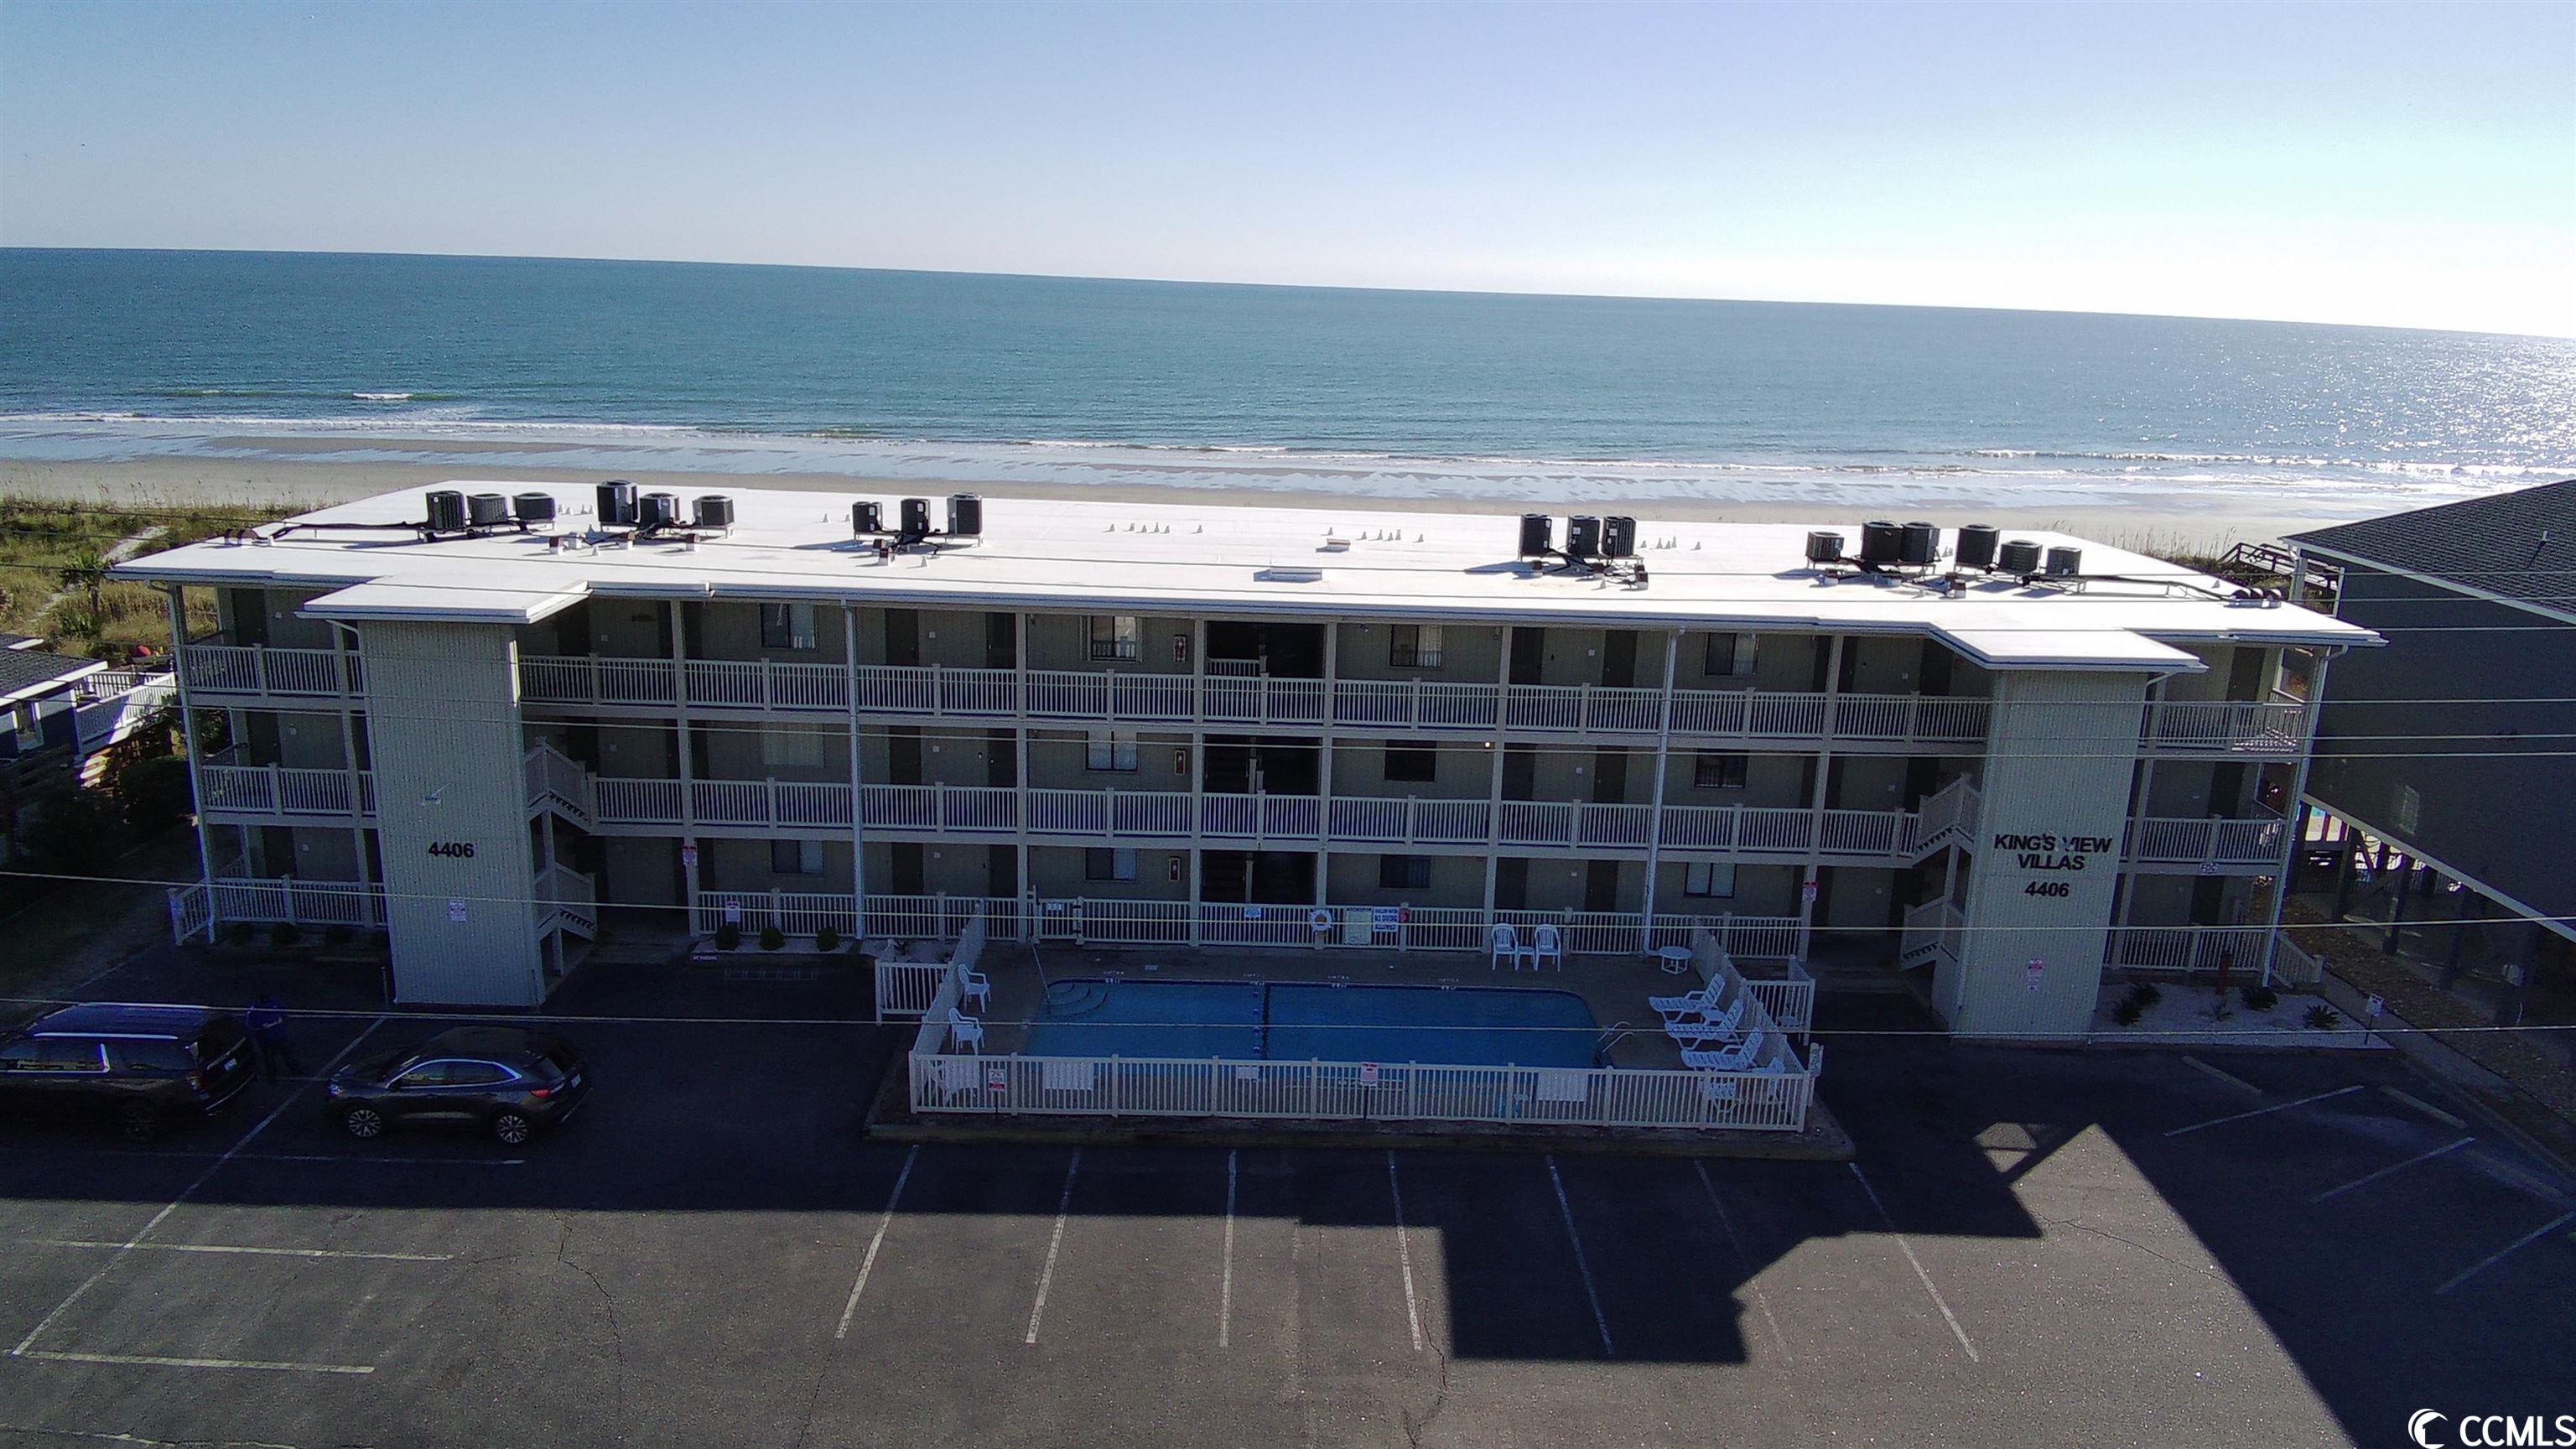 reduced!! true ground floor unit with direct beach walk out. located in the very sought after area of cherry grove. this recently remodeled spacious ocean front 2 bedroom, 2 bath first floor unit has quartz countertops, tile back splash, stainless steel appliances, full size ice maker, tiled showers and lpv flooring throughout. this unit comes furnished including the new in 2022 stackable washer and dryer.  new hvac installed 2023. new roof 2022. new sliding glass doors in lr and master bedroom in 2023. owners have used the unit as a vacation home. unit has a large back porch with direct access to beach. thanks to mother nature the sand dunes have built up behind the condo. this has limited the direct ocean view; however, the crashing wavesounds are incredibly and it has awesome privacy and is only steps to the beach. come see this great beach getaway steps from the beach! currently with rented through march 31.